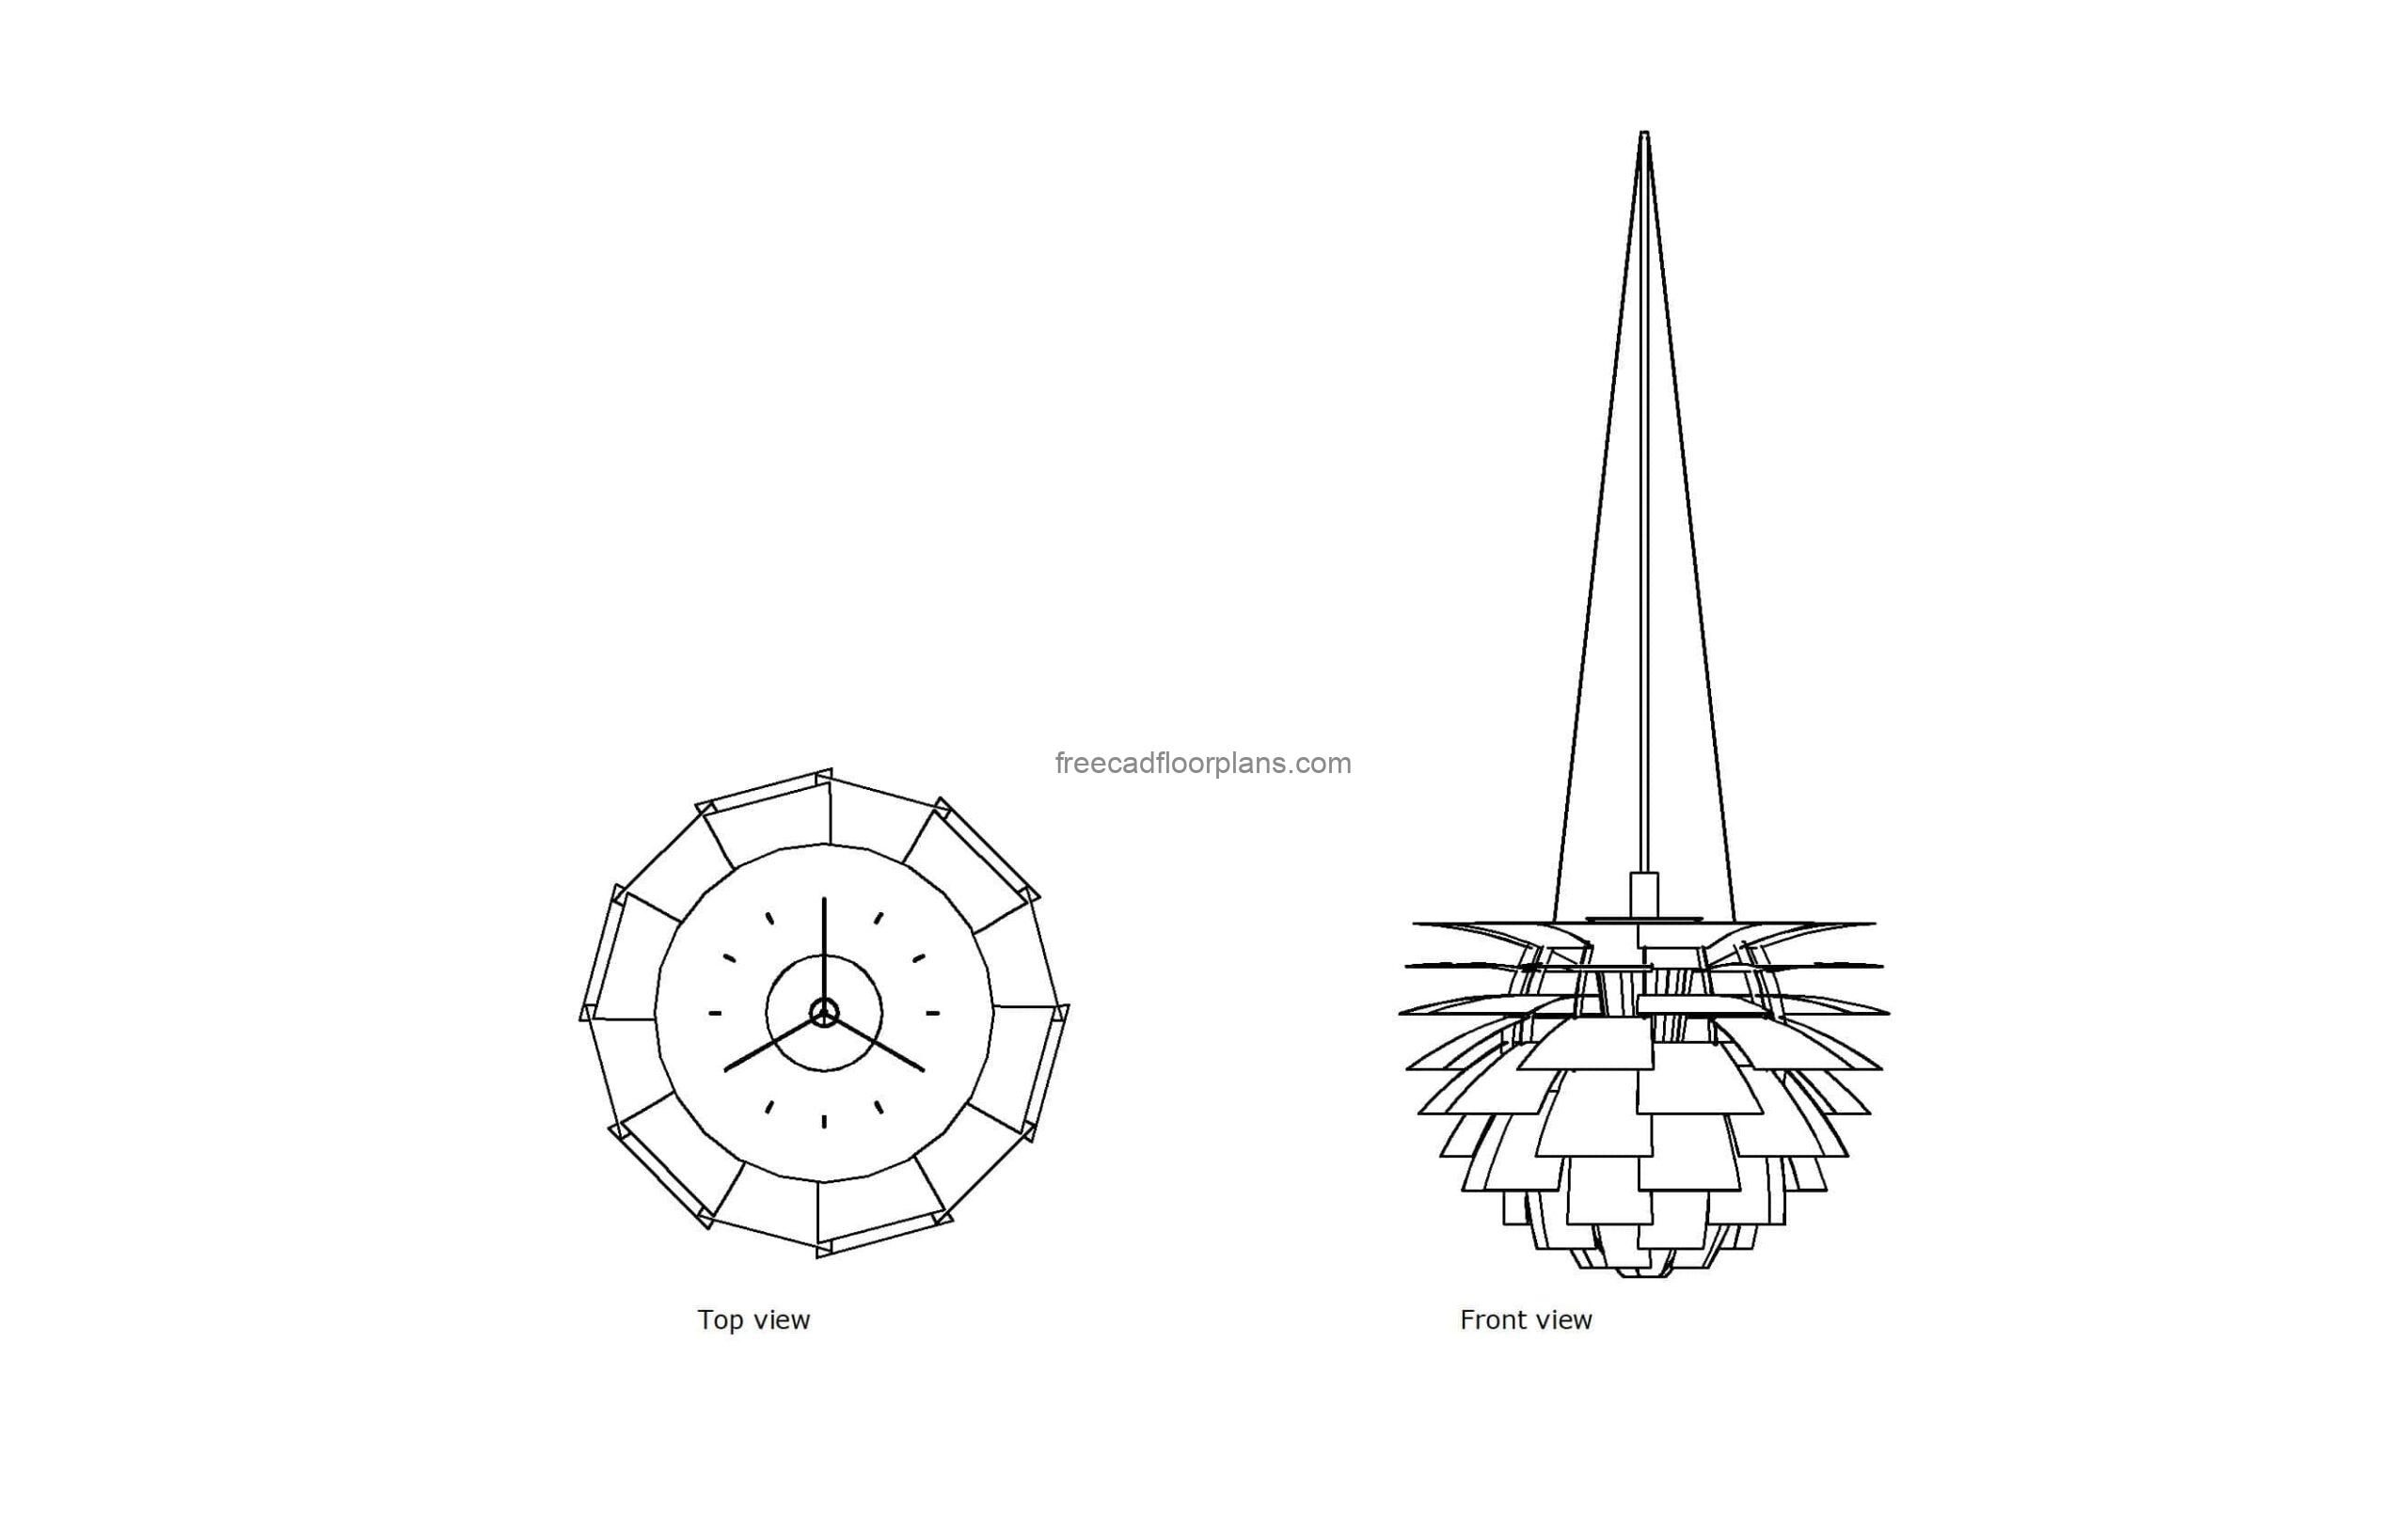 autocad drawing of an artichoke light, plan and elevation dwg file for free download